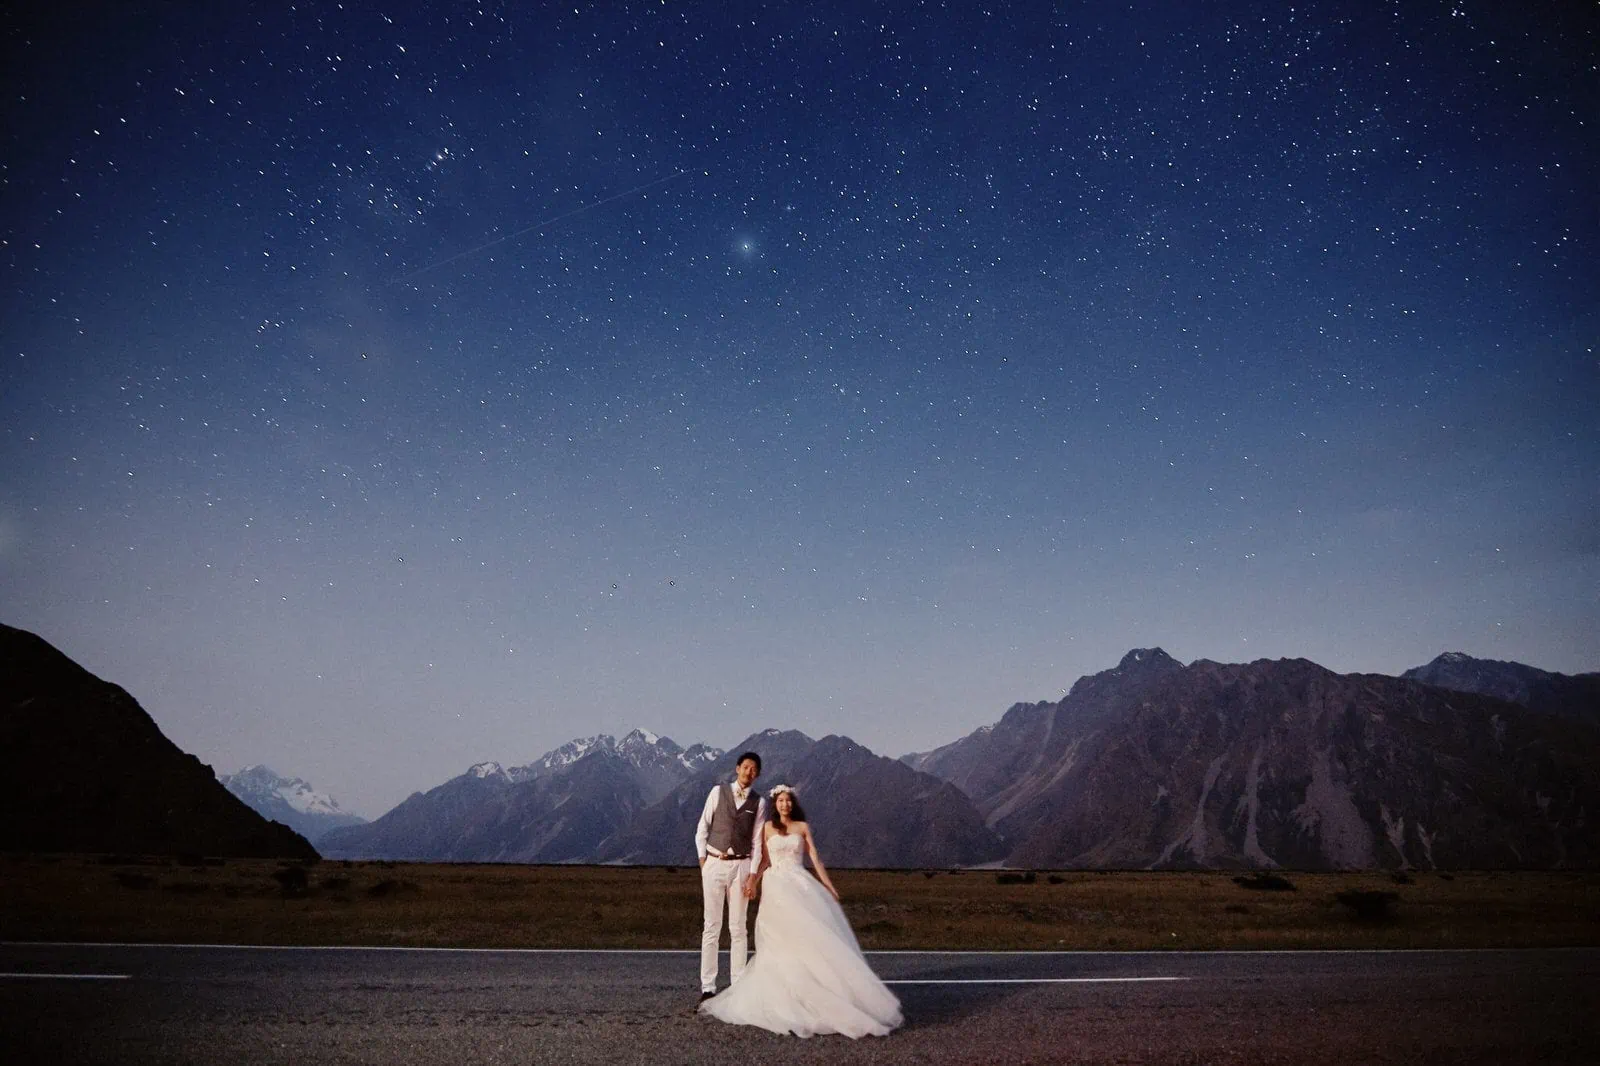 Queenstown New Zealand Elopement Wedding Photographer - A beautiful couple, the bride and groom, bask under the starry night sky on a picturesque road in New Zealand.